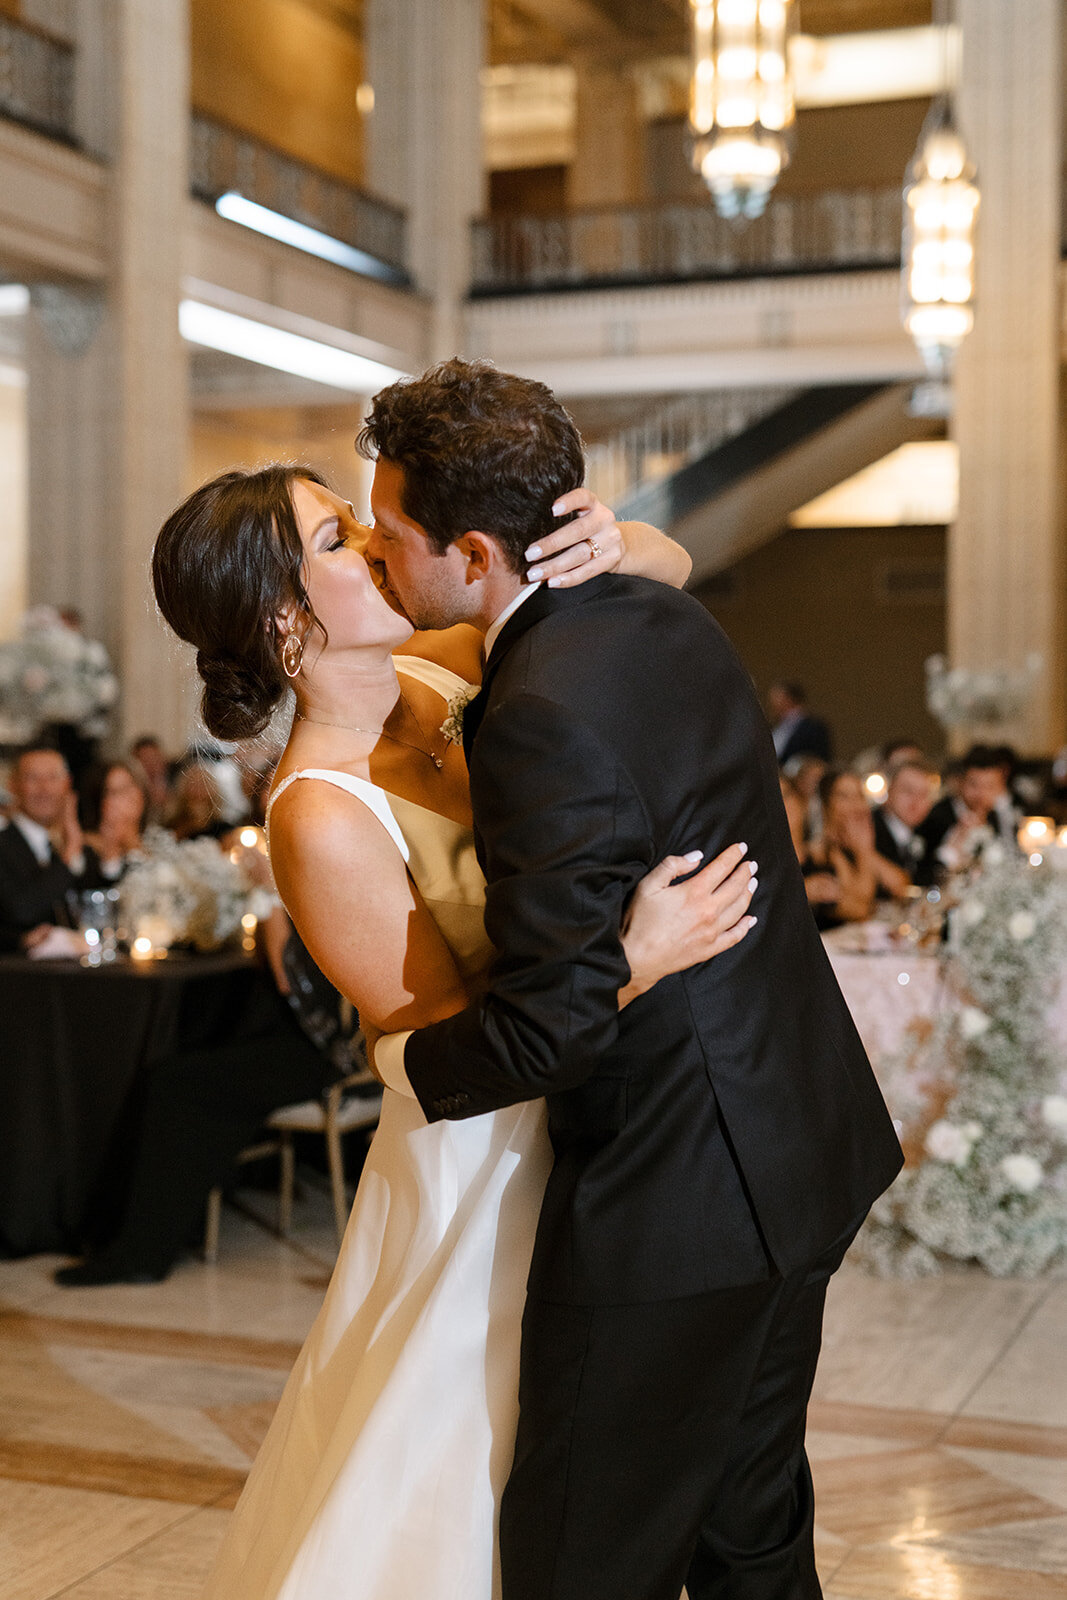 Kylie and Jack at The Grand Hall - Kansas City Wedding Photograpy - Nick and Lexie Photo Film-922